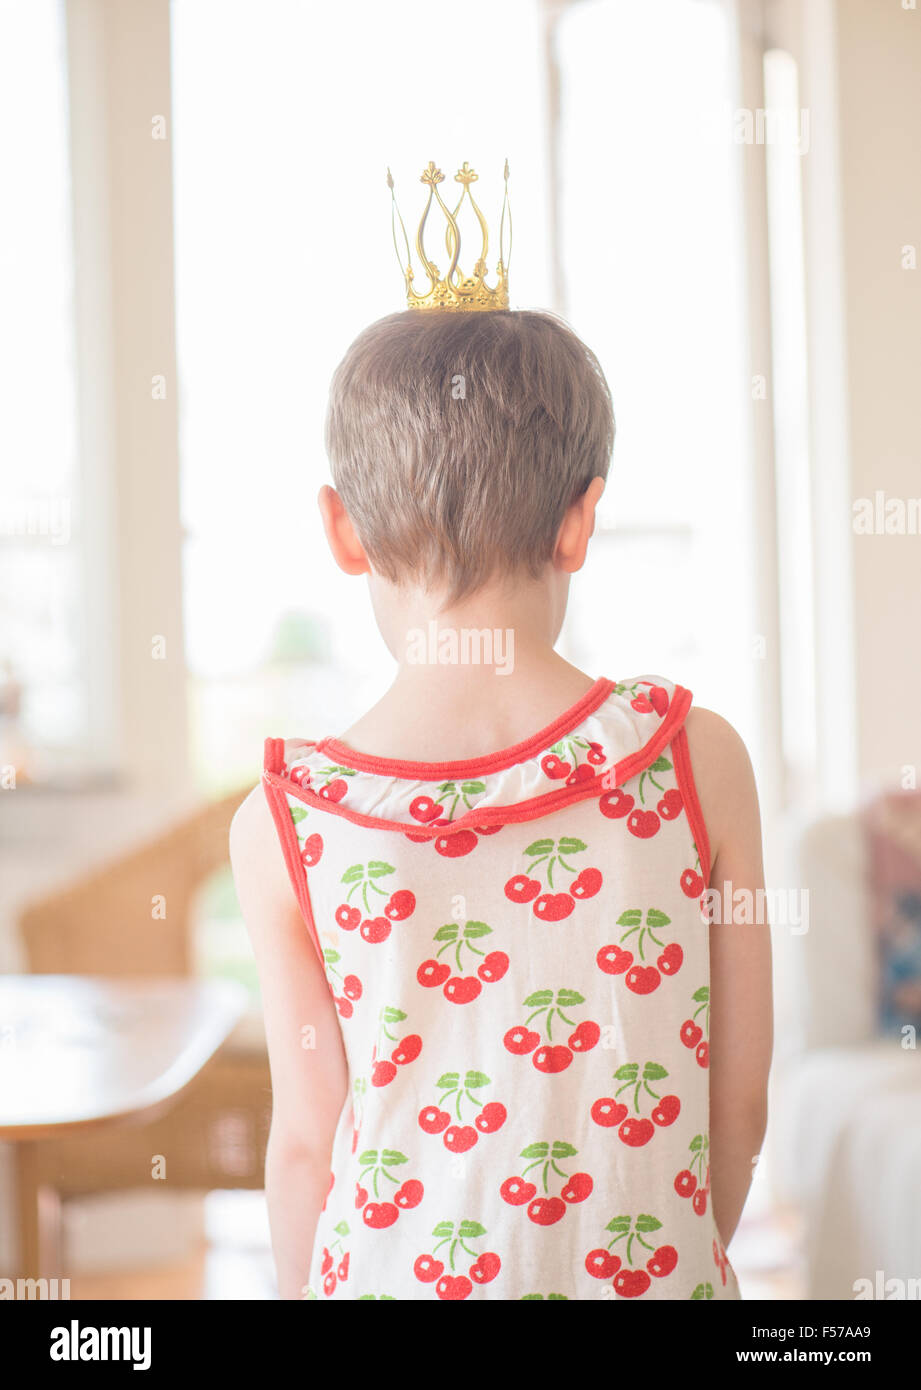 Little girl playing princess at home in living room. Concept of childhood, aspirations and innocence. Stock Photo